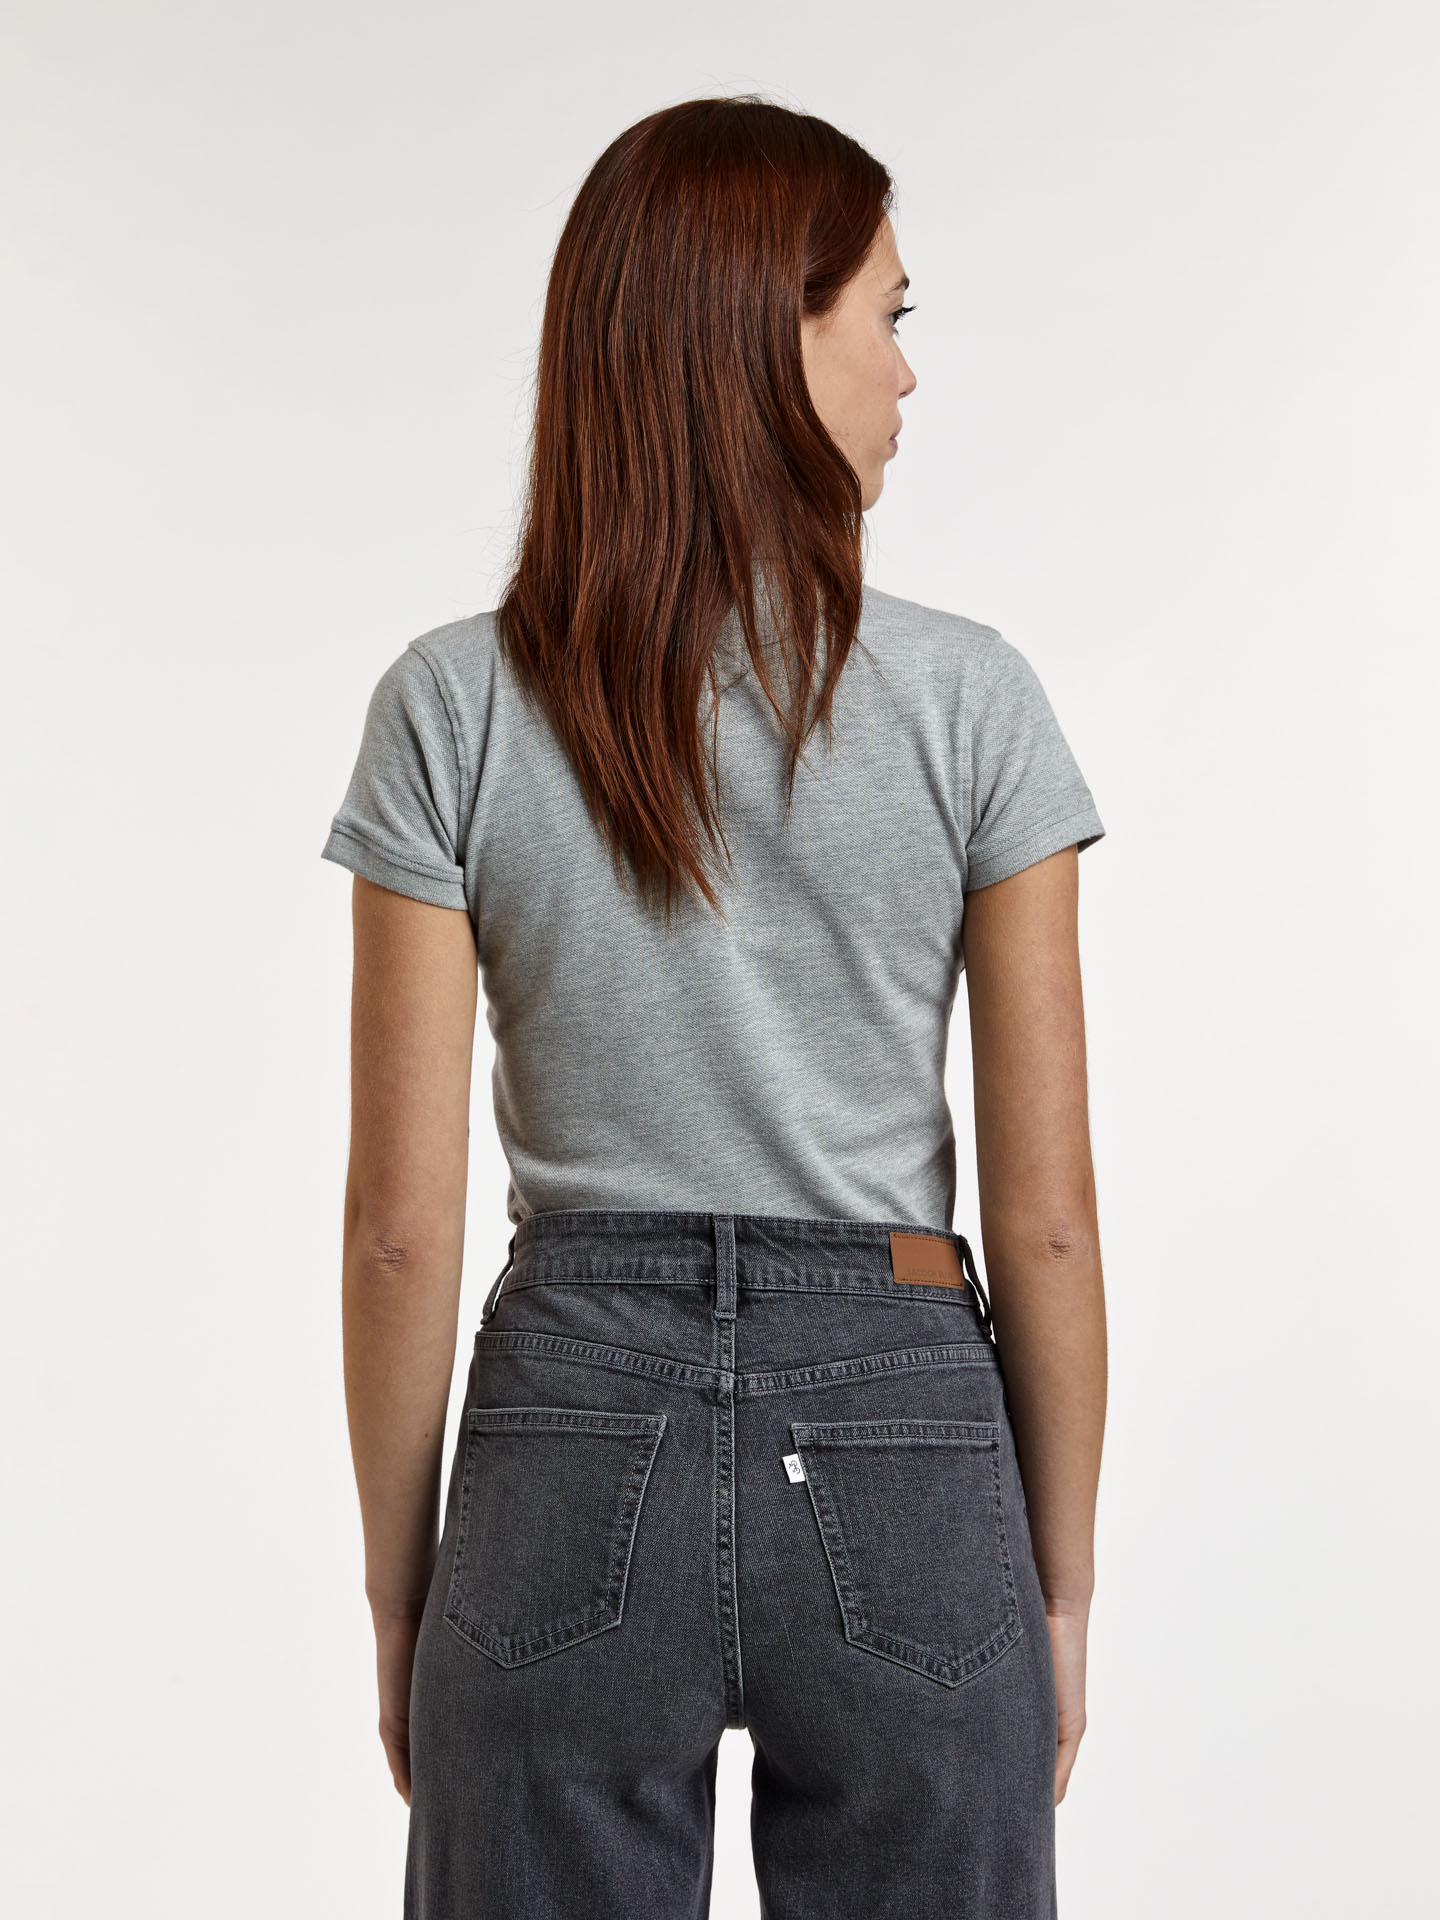 Jeans Grey Casual Woman